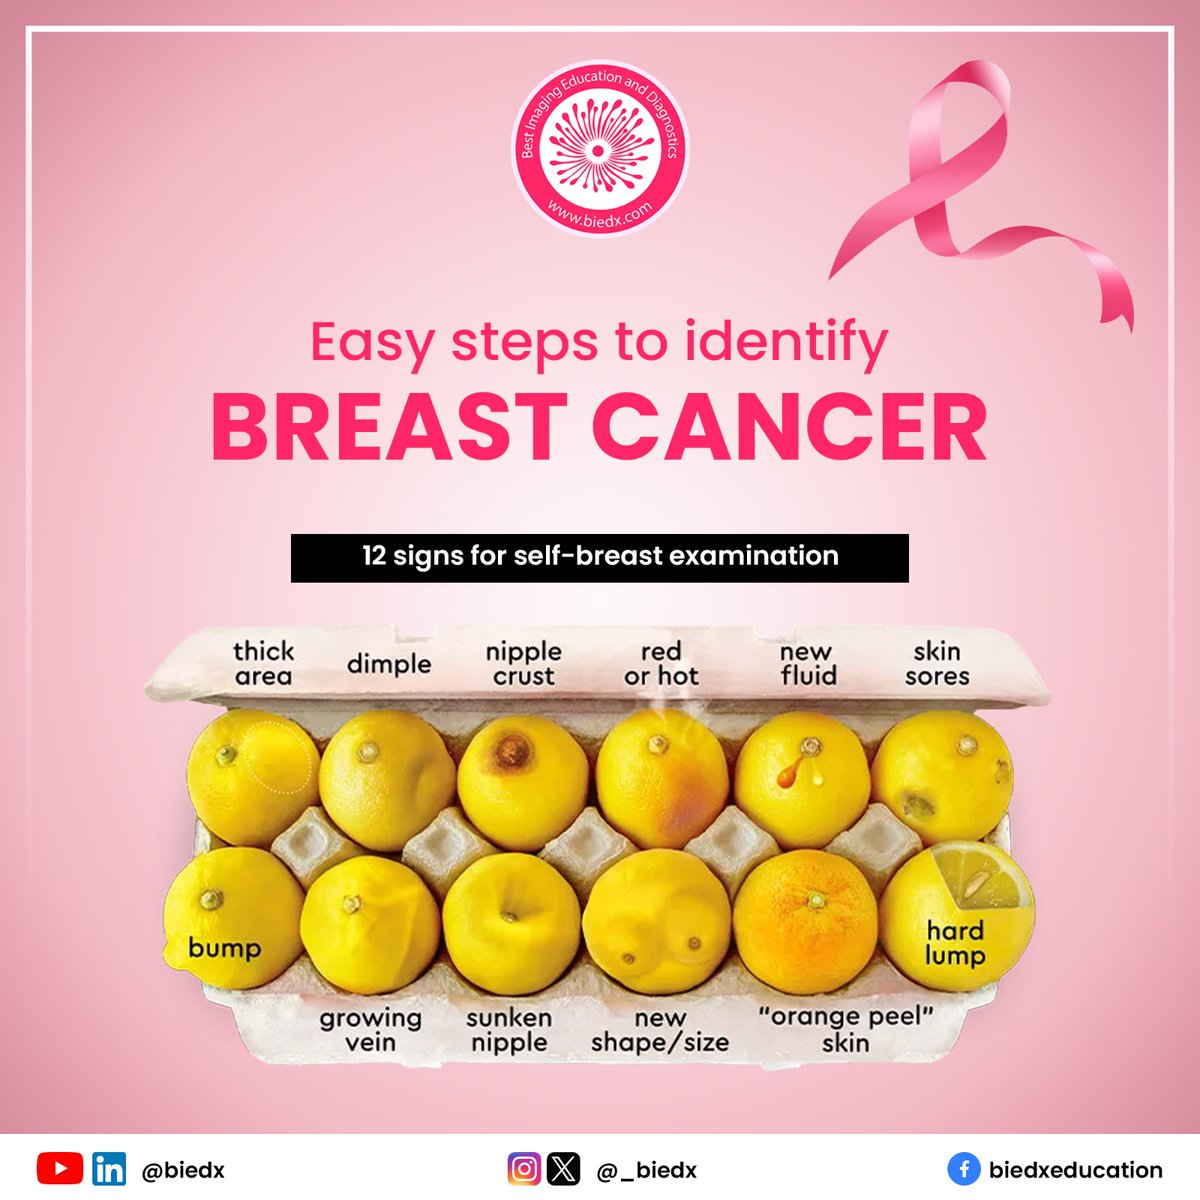 'Early detection is key. Spot the signs of breast cancer with these simple steps. Your health is in your hands!'

Share with your women to show you care!

#BreastImaging #Mammography #AI #BreastMRI #MRI #RadiologyEducation #MedicalCourses #ImagingTraining #HealthcareLearning